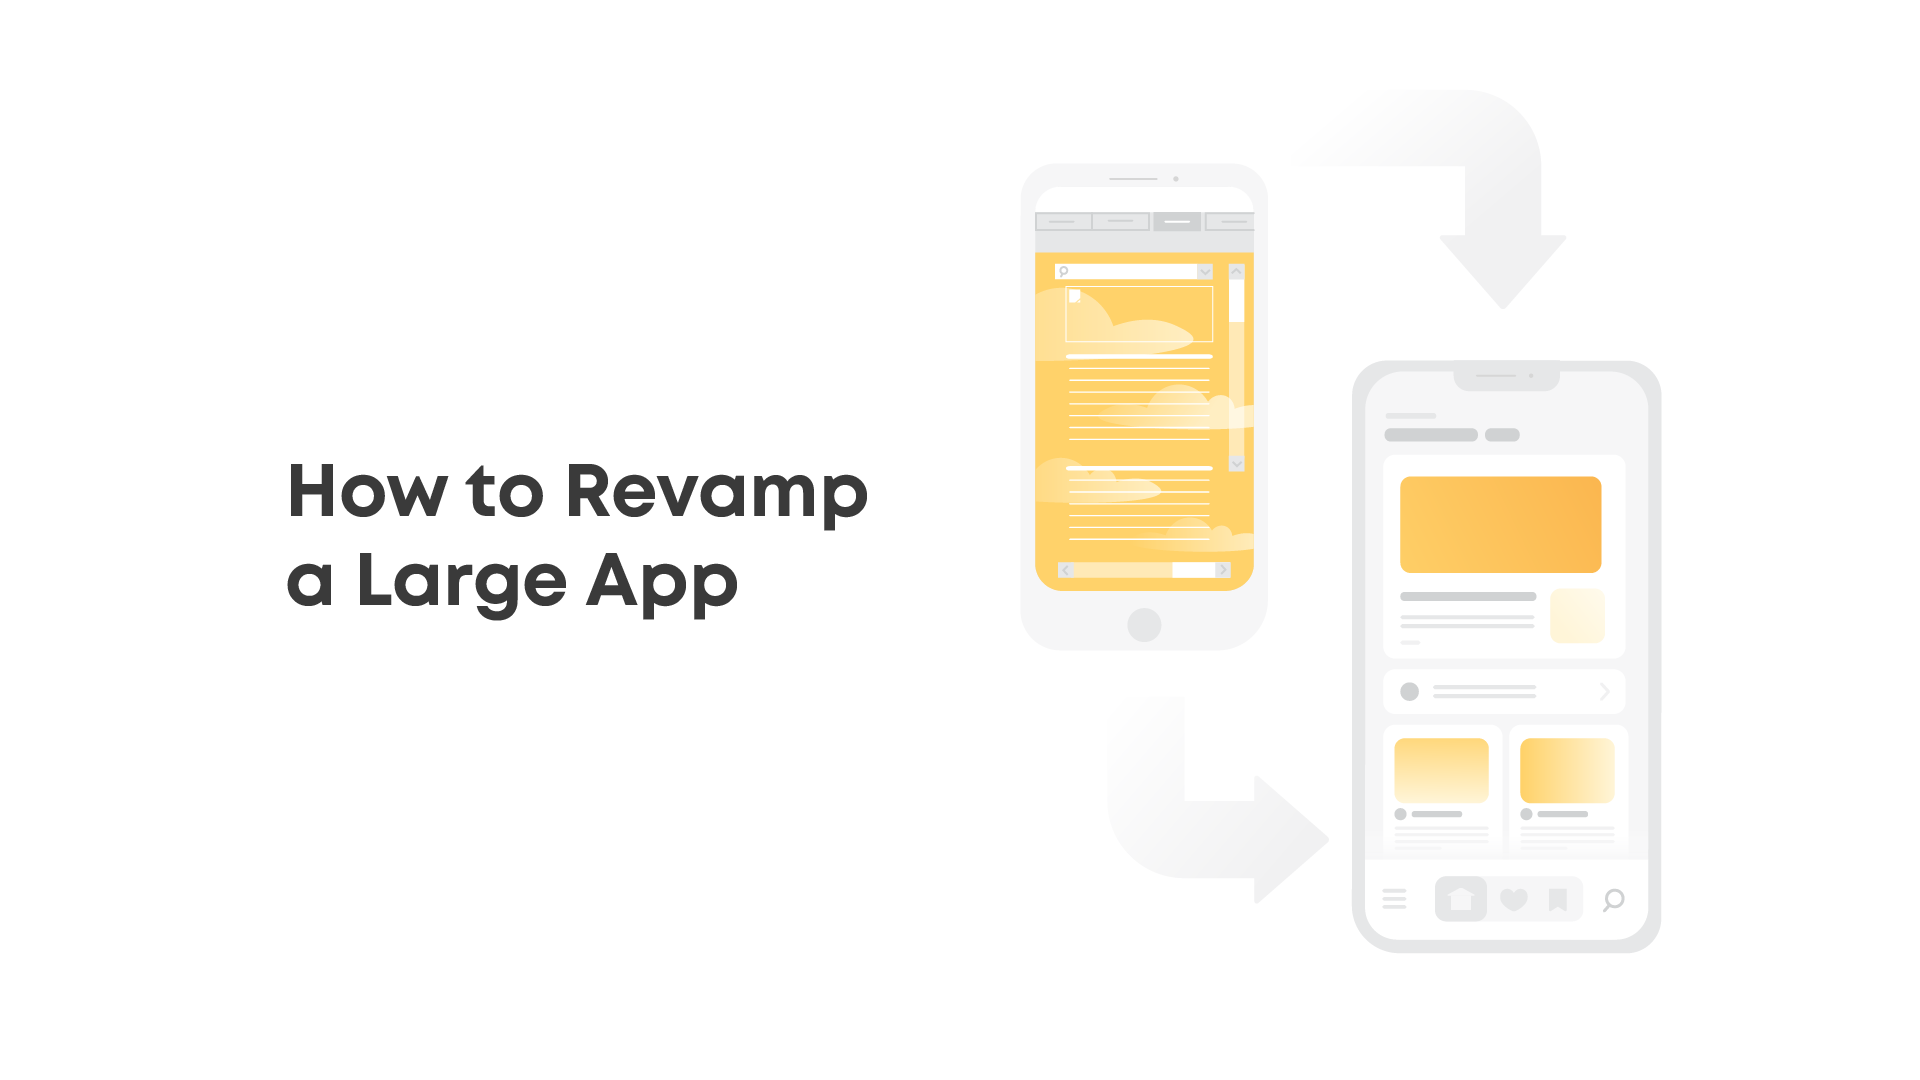 A Full Guide to Revamping a Large App